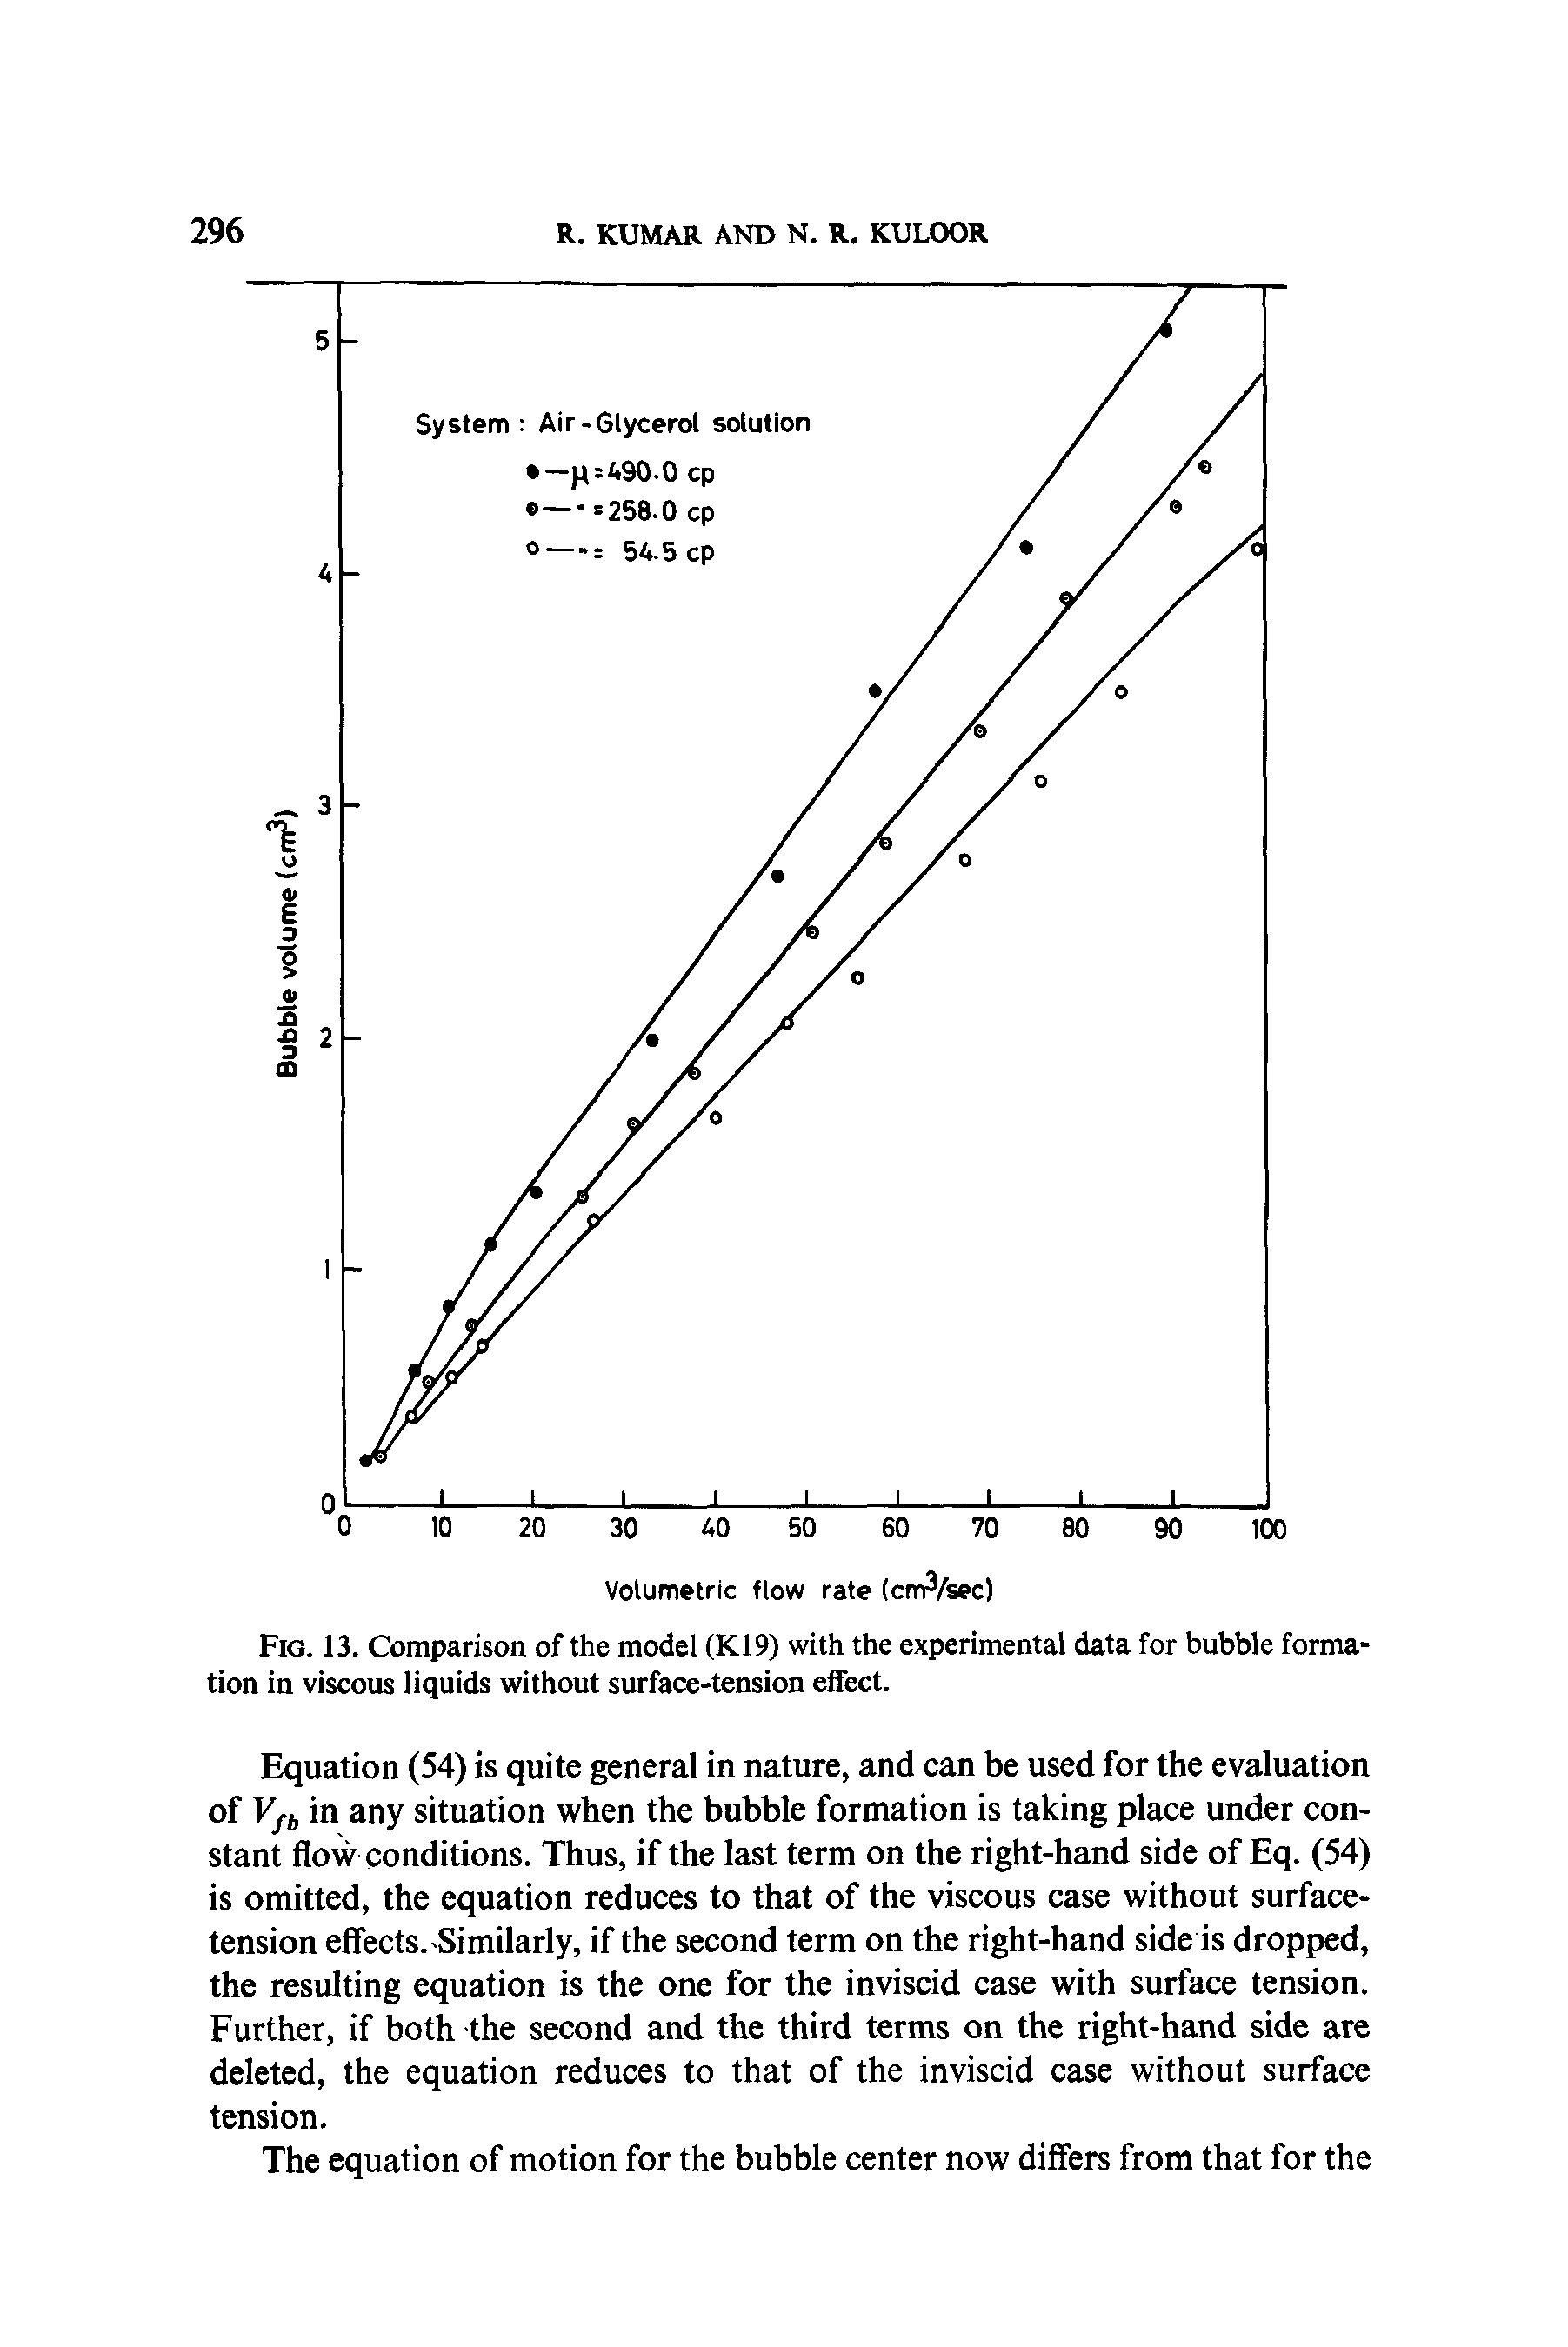 Fig. 13. Comparison of the model (K19) with the experimental data for bubble formation in viscous liquids without surface-tension effect.